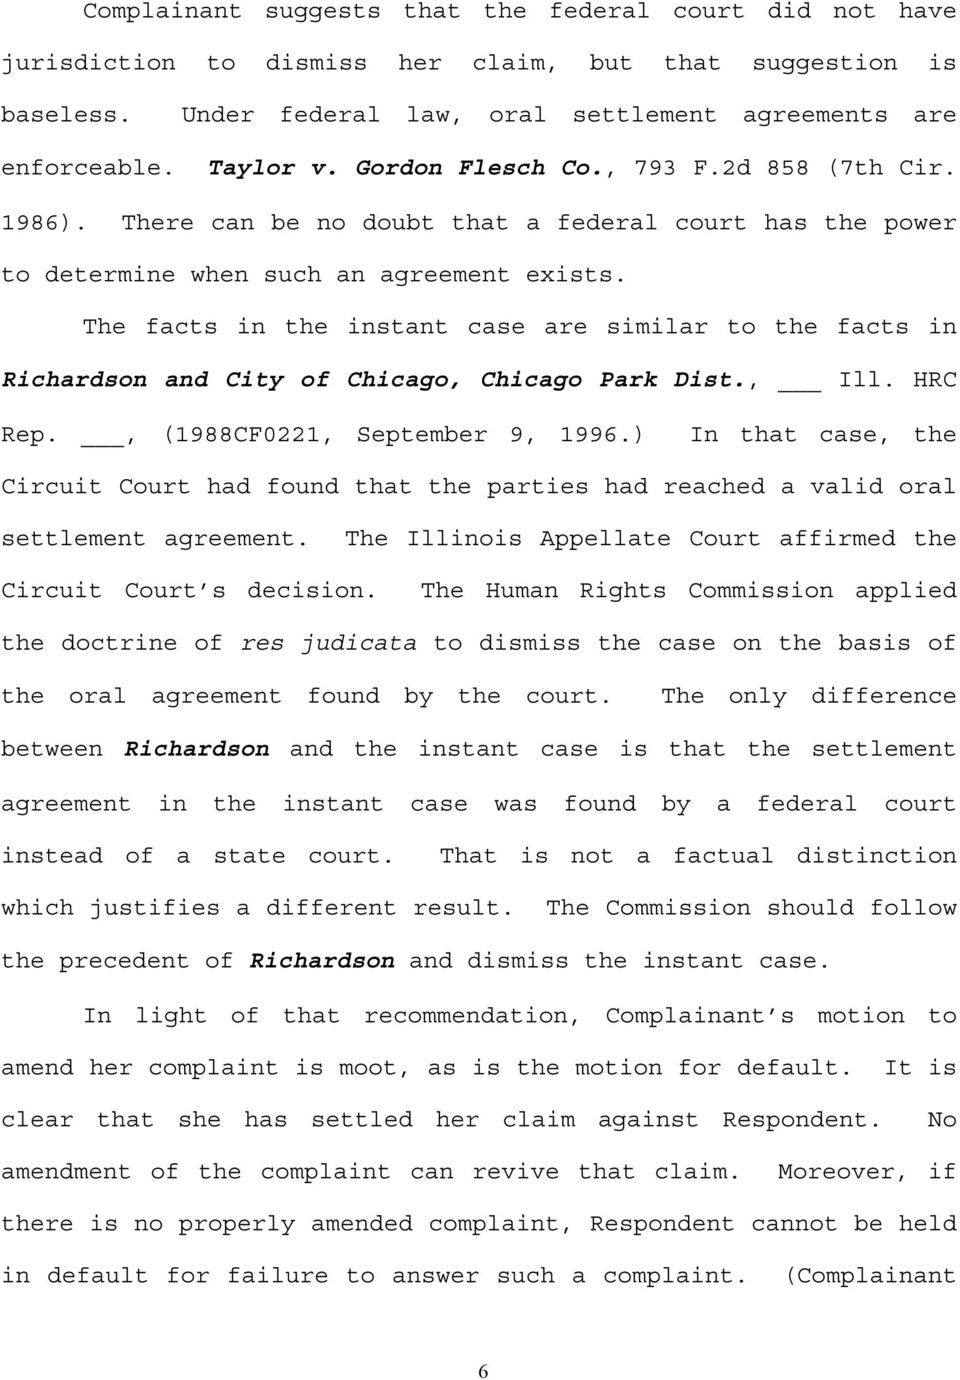 The facts in the instant case are similar to the facts in Richardson and City of Chicago, Chicago Park Dist., Ill. HRC Rep., (1988CF0221, September 9, 1996.